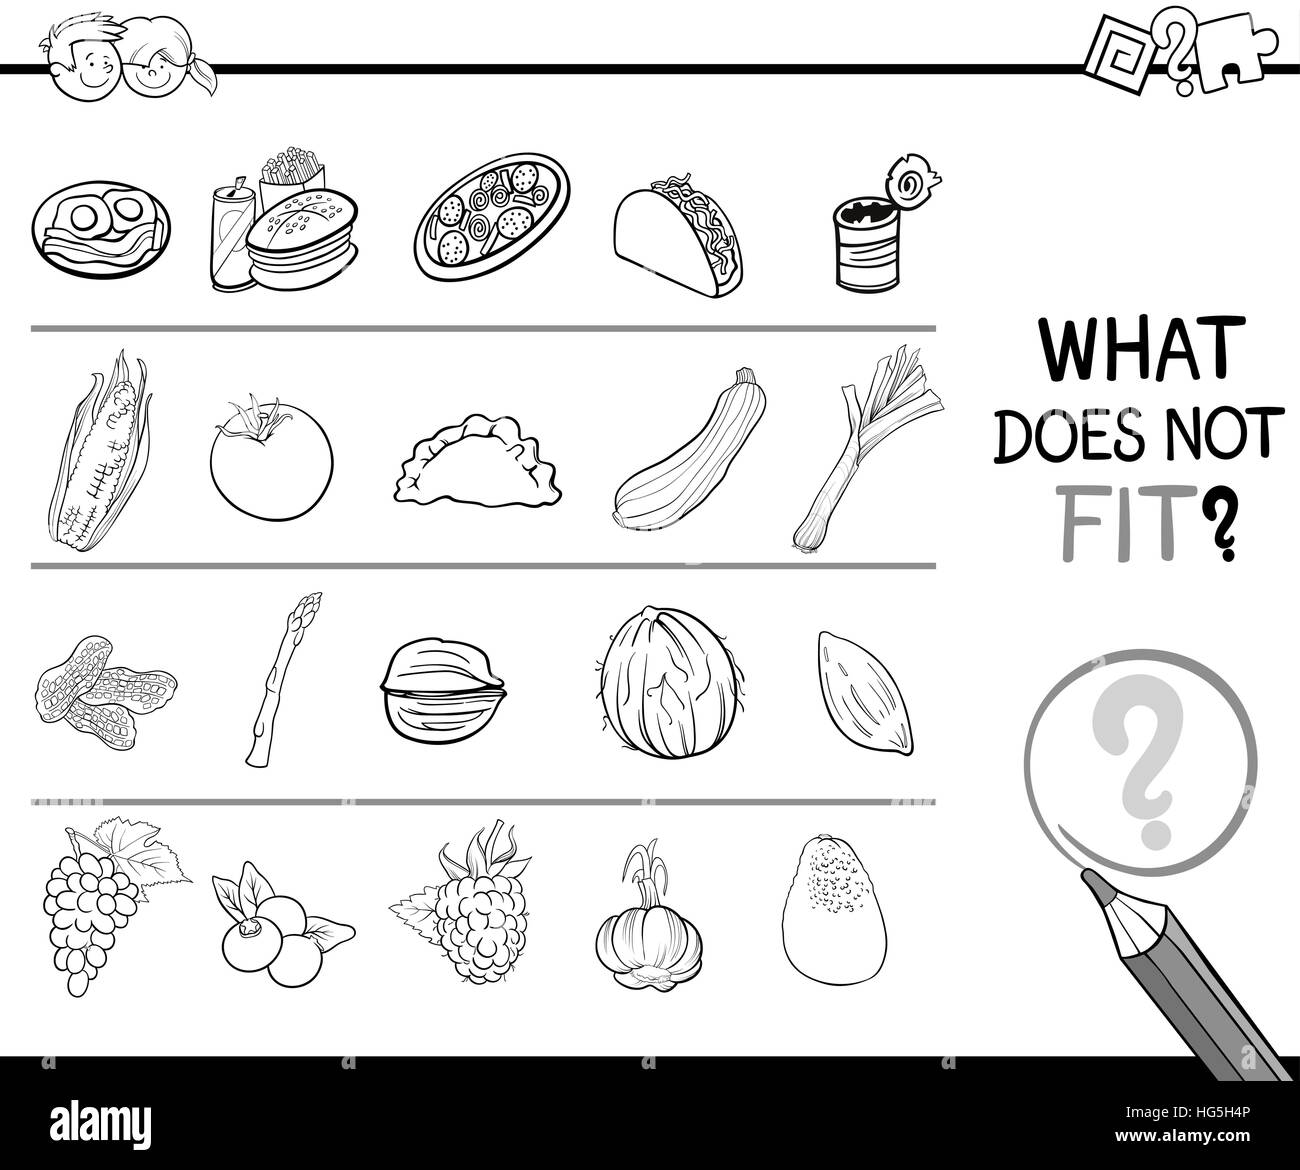 Black and White Cartoon Illustration of Finding Improper Picture in the Row Educational Game for Children with Food Objects Coloring Page Stock Vector